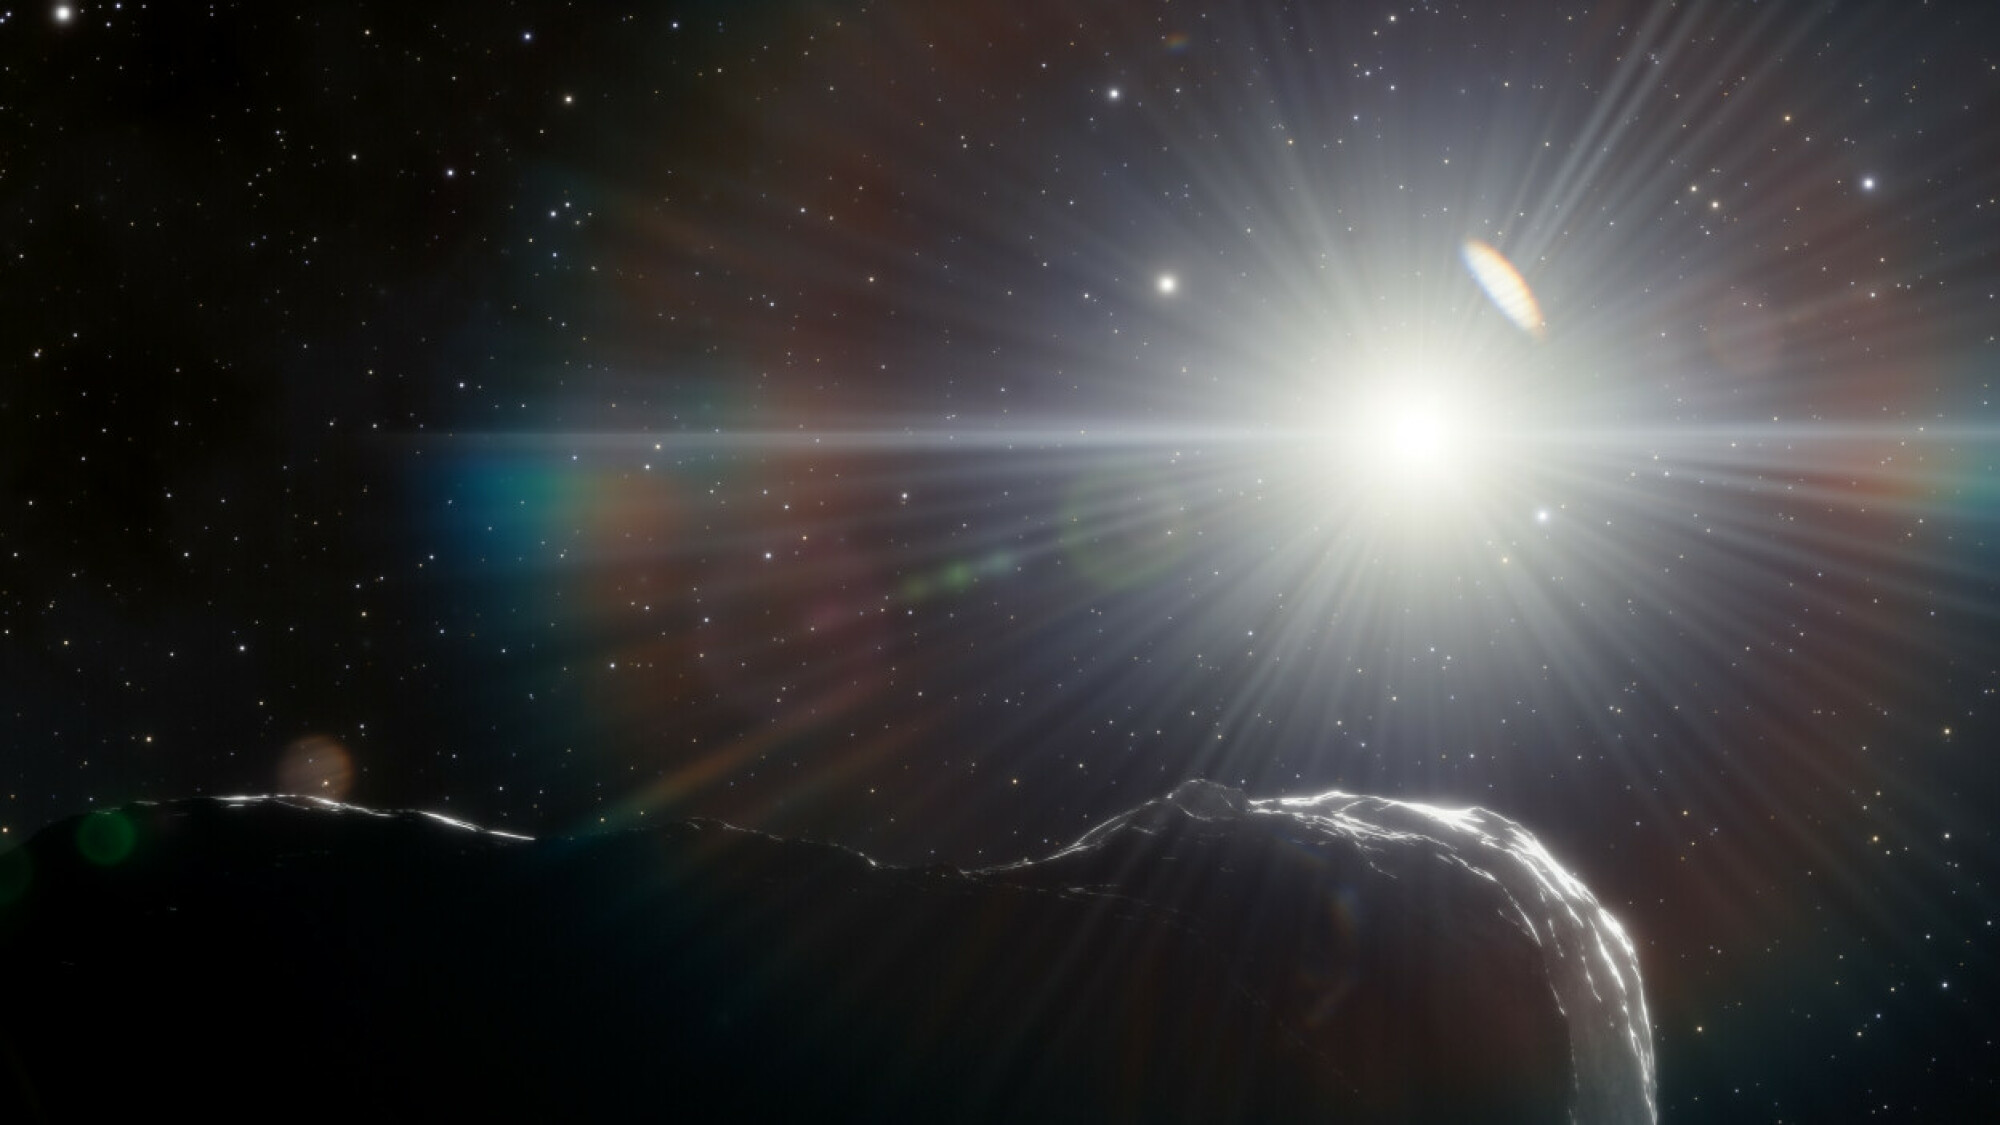 An asteroid hiding in the glare of the sun